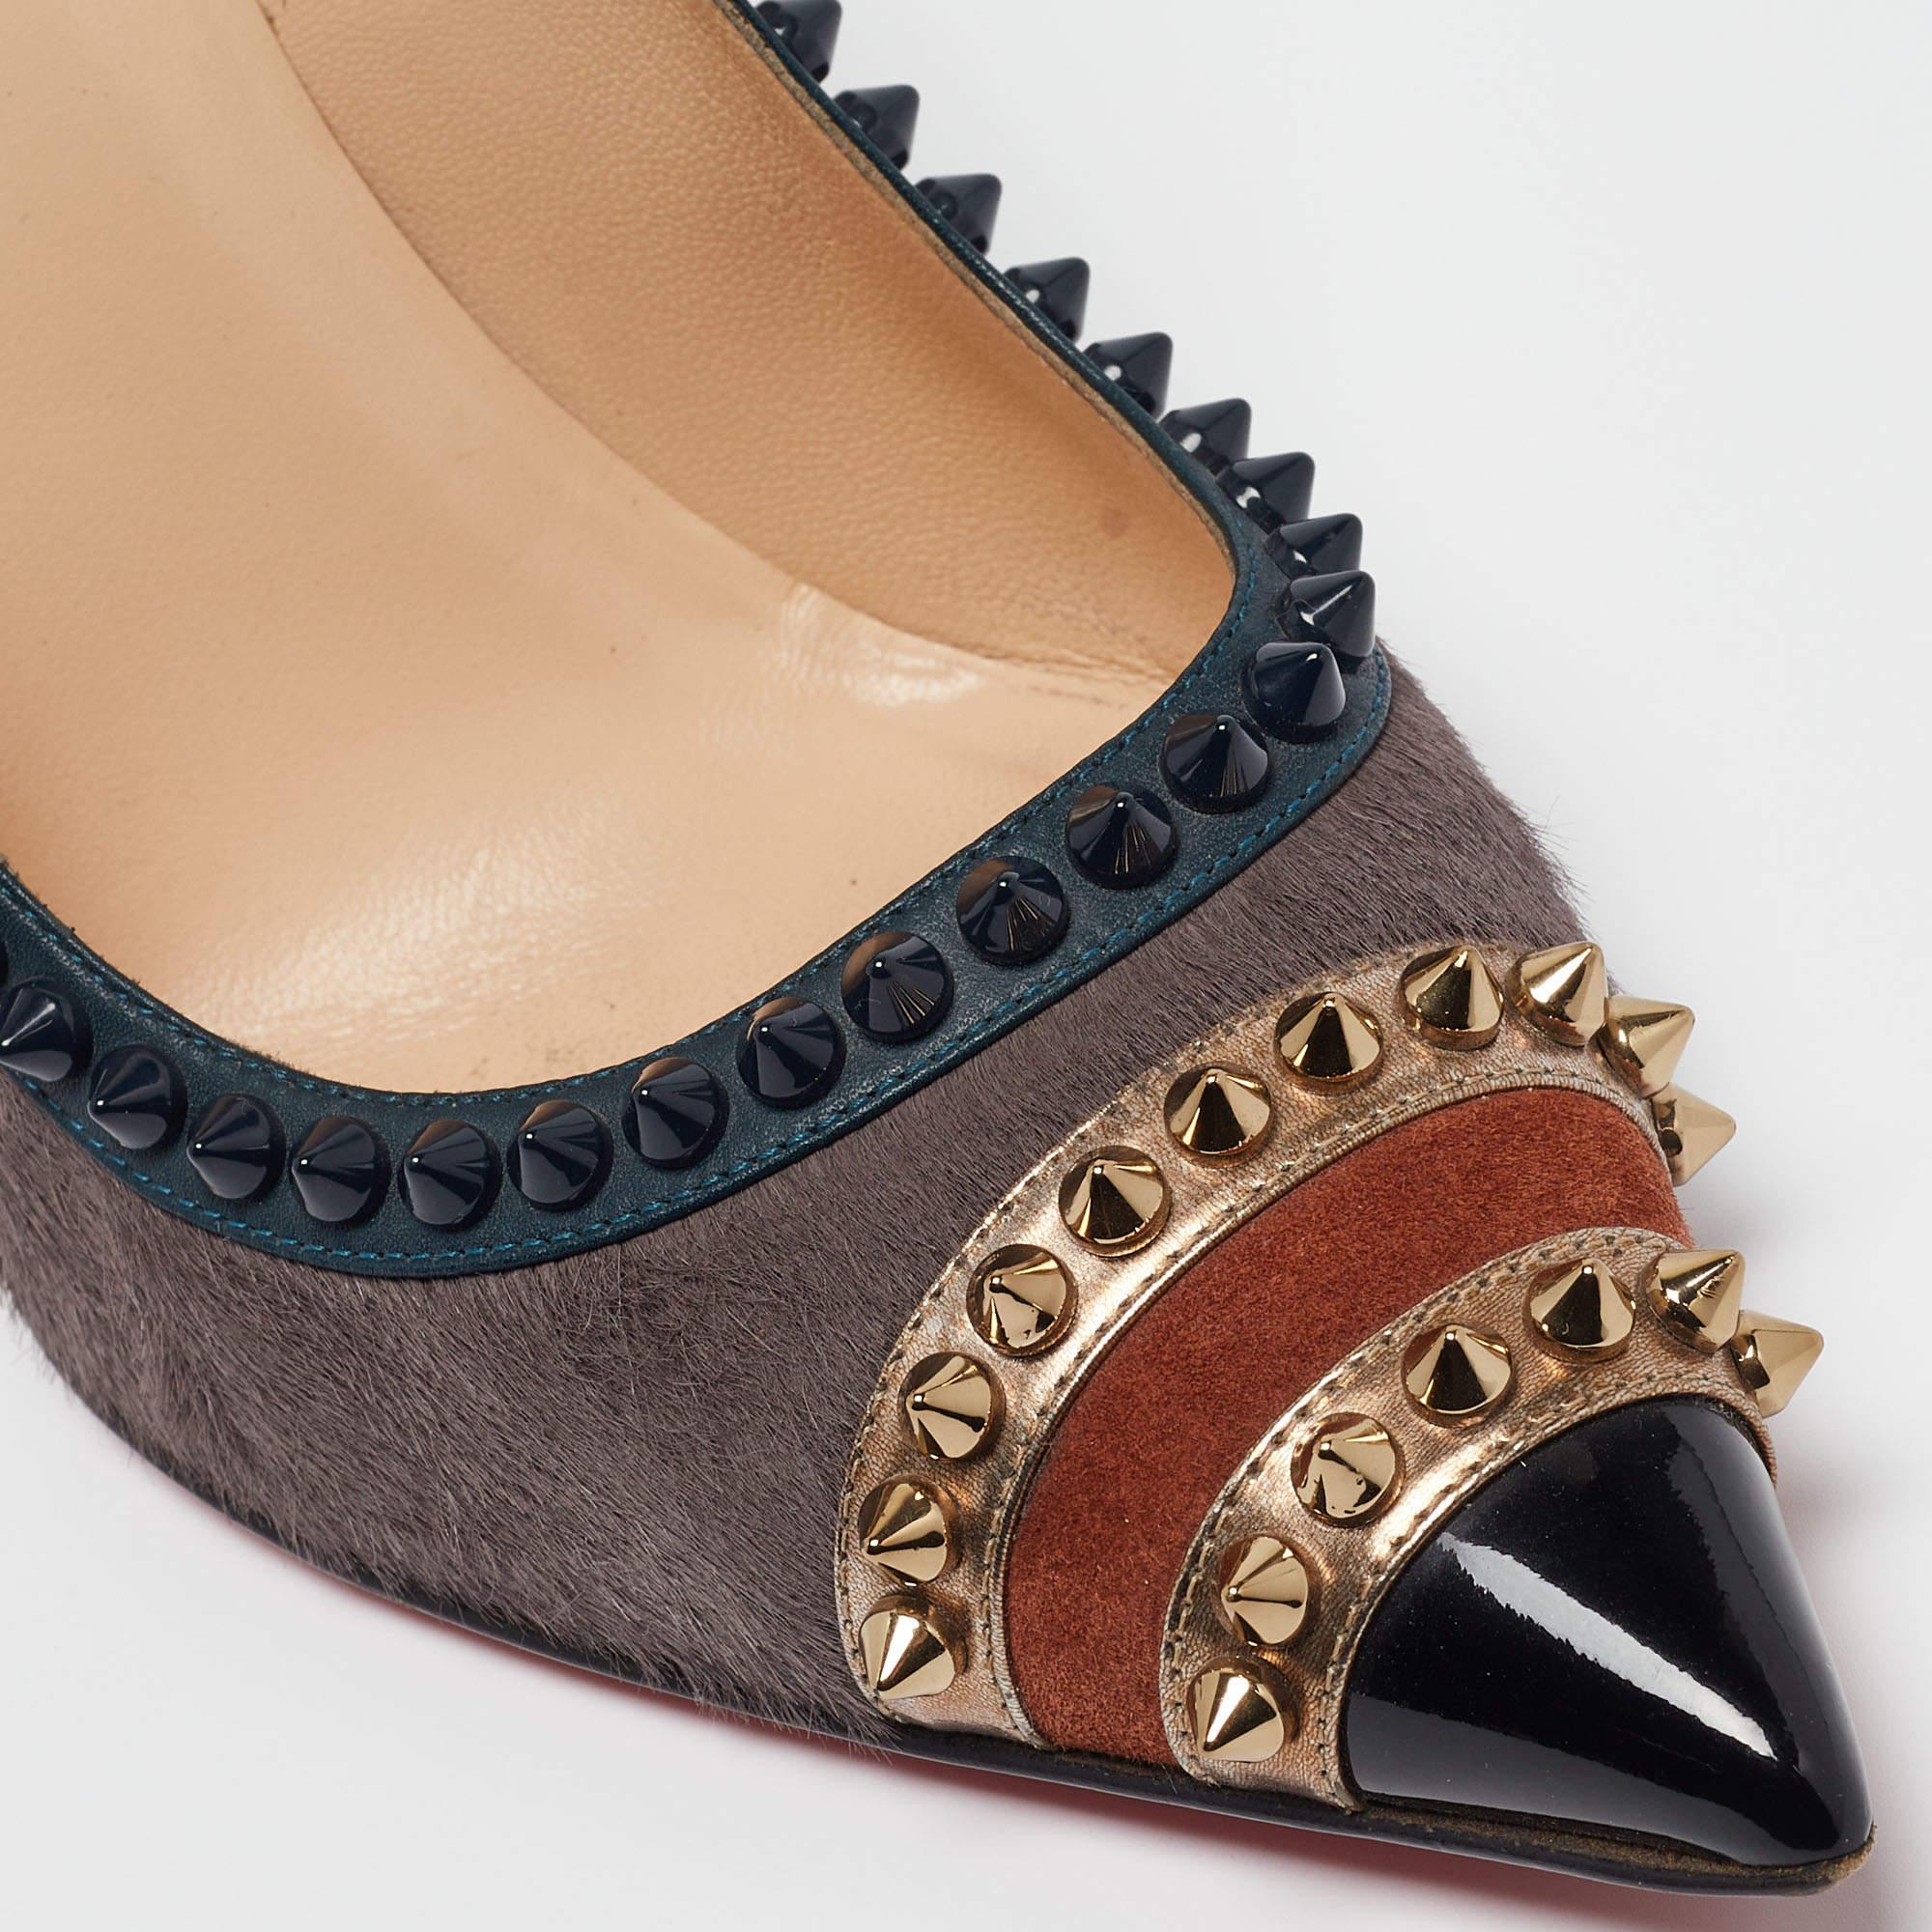 Christian Louboutin Multicolor Calf Hair and Leather Malabar Hill Spiked Pointed For Sale 3